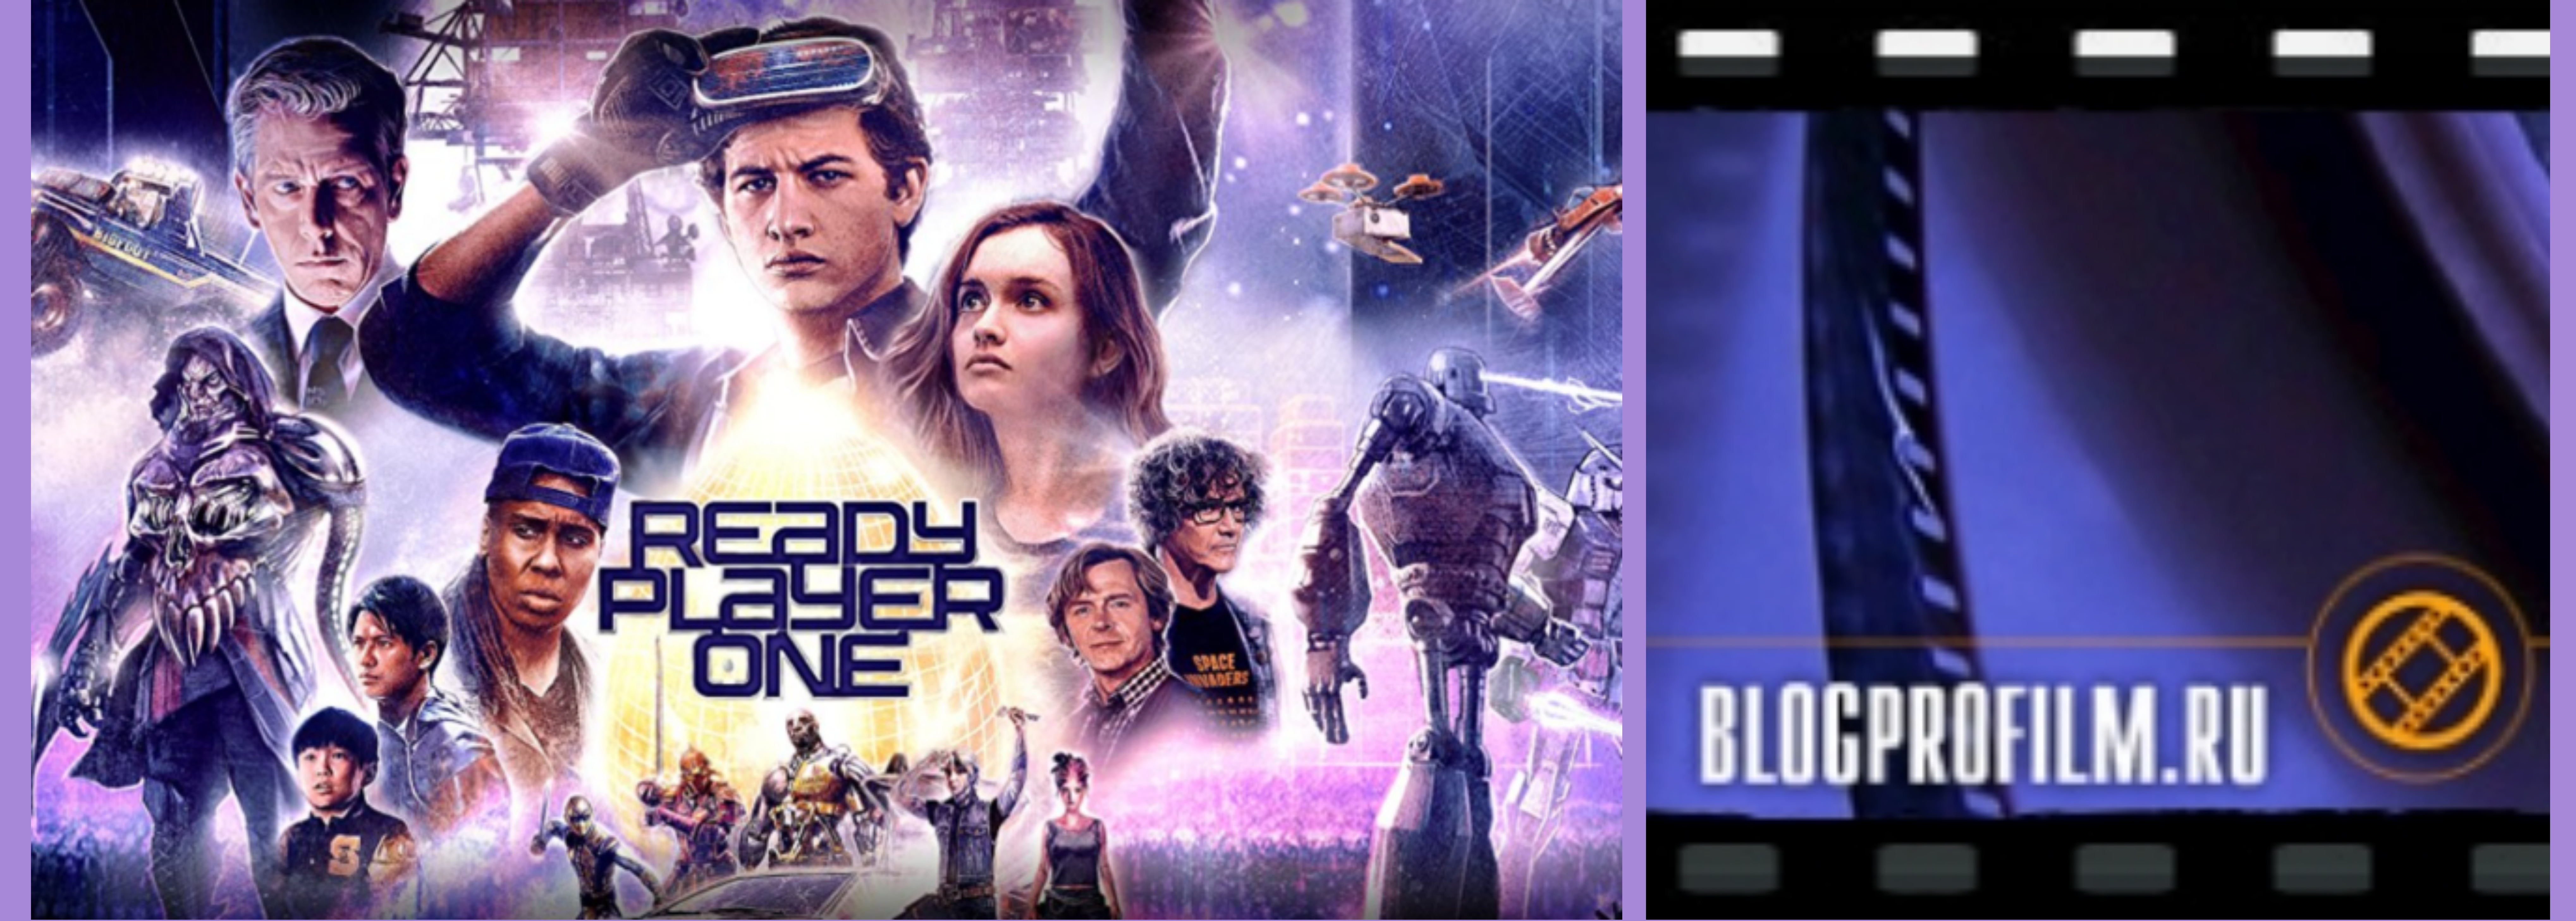 Ready Player One movie cast: Who are the young kids?